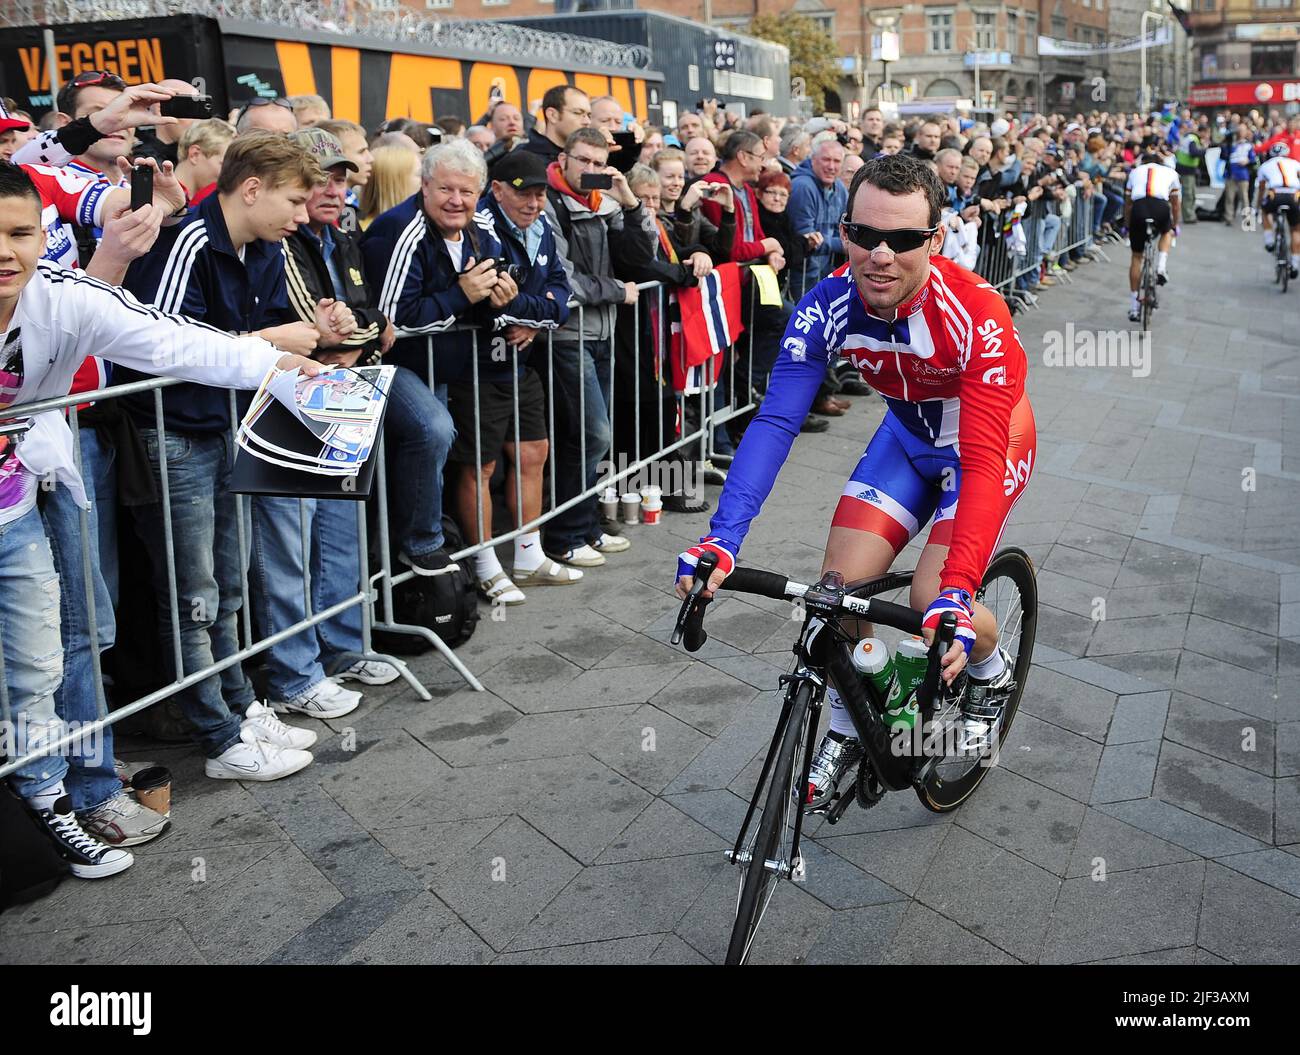 File photo dated 25-09-2011 of Great Britain's Mark Cavendish arrives at the start during Day Seven of the UCI Road Race World Championships, Copenhagen. Originally due to host the Grand Depart last year before the Covid-19 pandemic intervened, 12 months later Denmark will be the starting point for a 3,328km race that will then head across the north of France, into the Alps and then to the Pyrenees before the traditional finish in Paris. Issue date: Wednesday June 29, 2022. Stock Photo